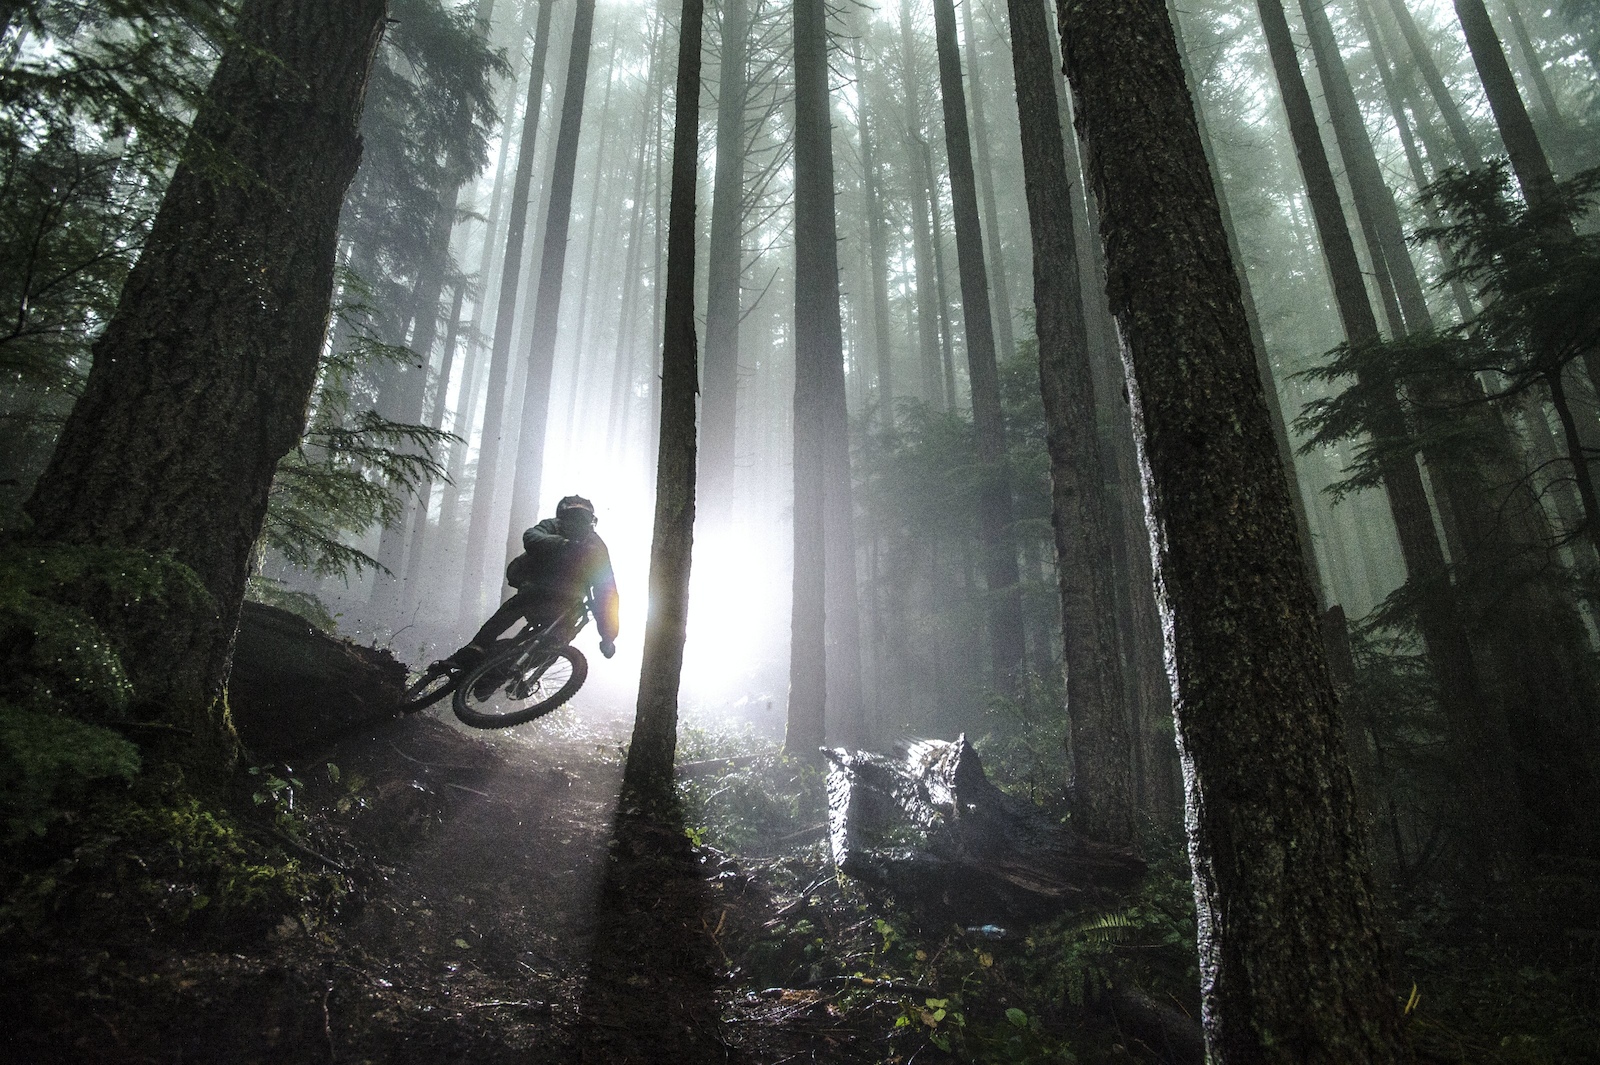 Brandon Semenuk rides a trail in the rain during the filming of Rad Company, in Sunshine Coast, BC, Canada, on 5 April, 2014. // Scott Markewitz/Red Bull Content Pool // P-20140604-00426 // Usage for editorial use only // Please go to www.redbullcontentpool.com for further information. //